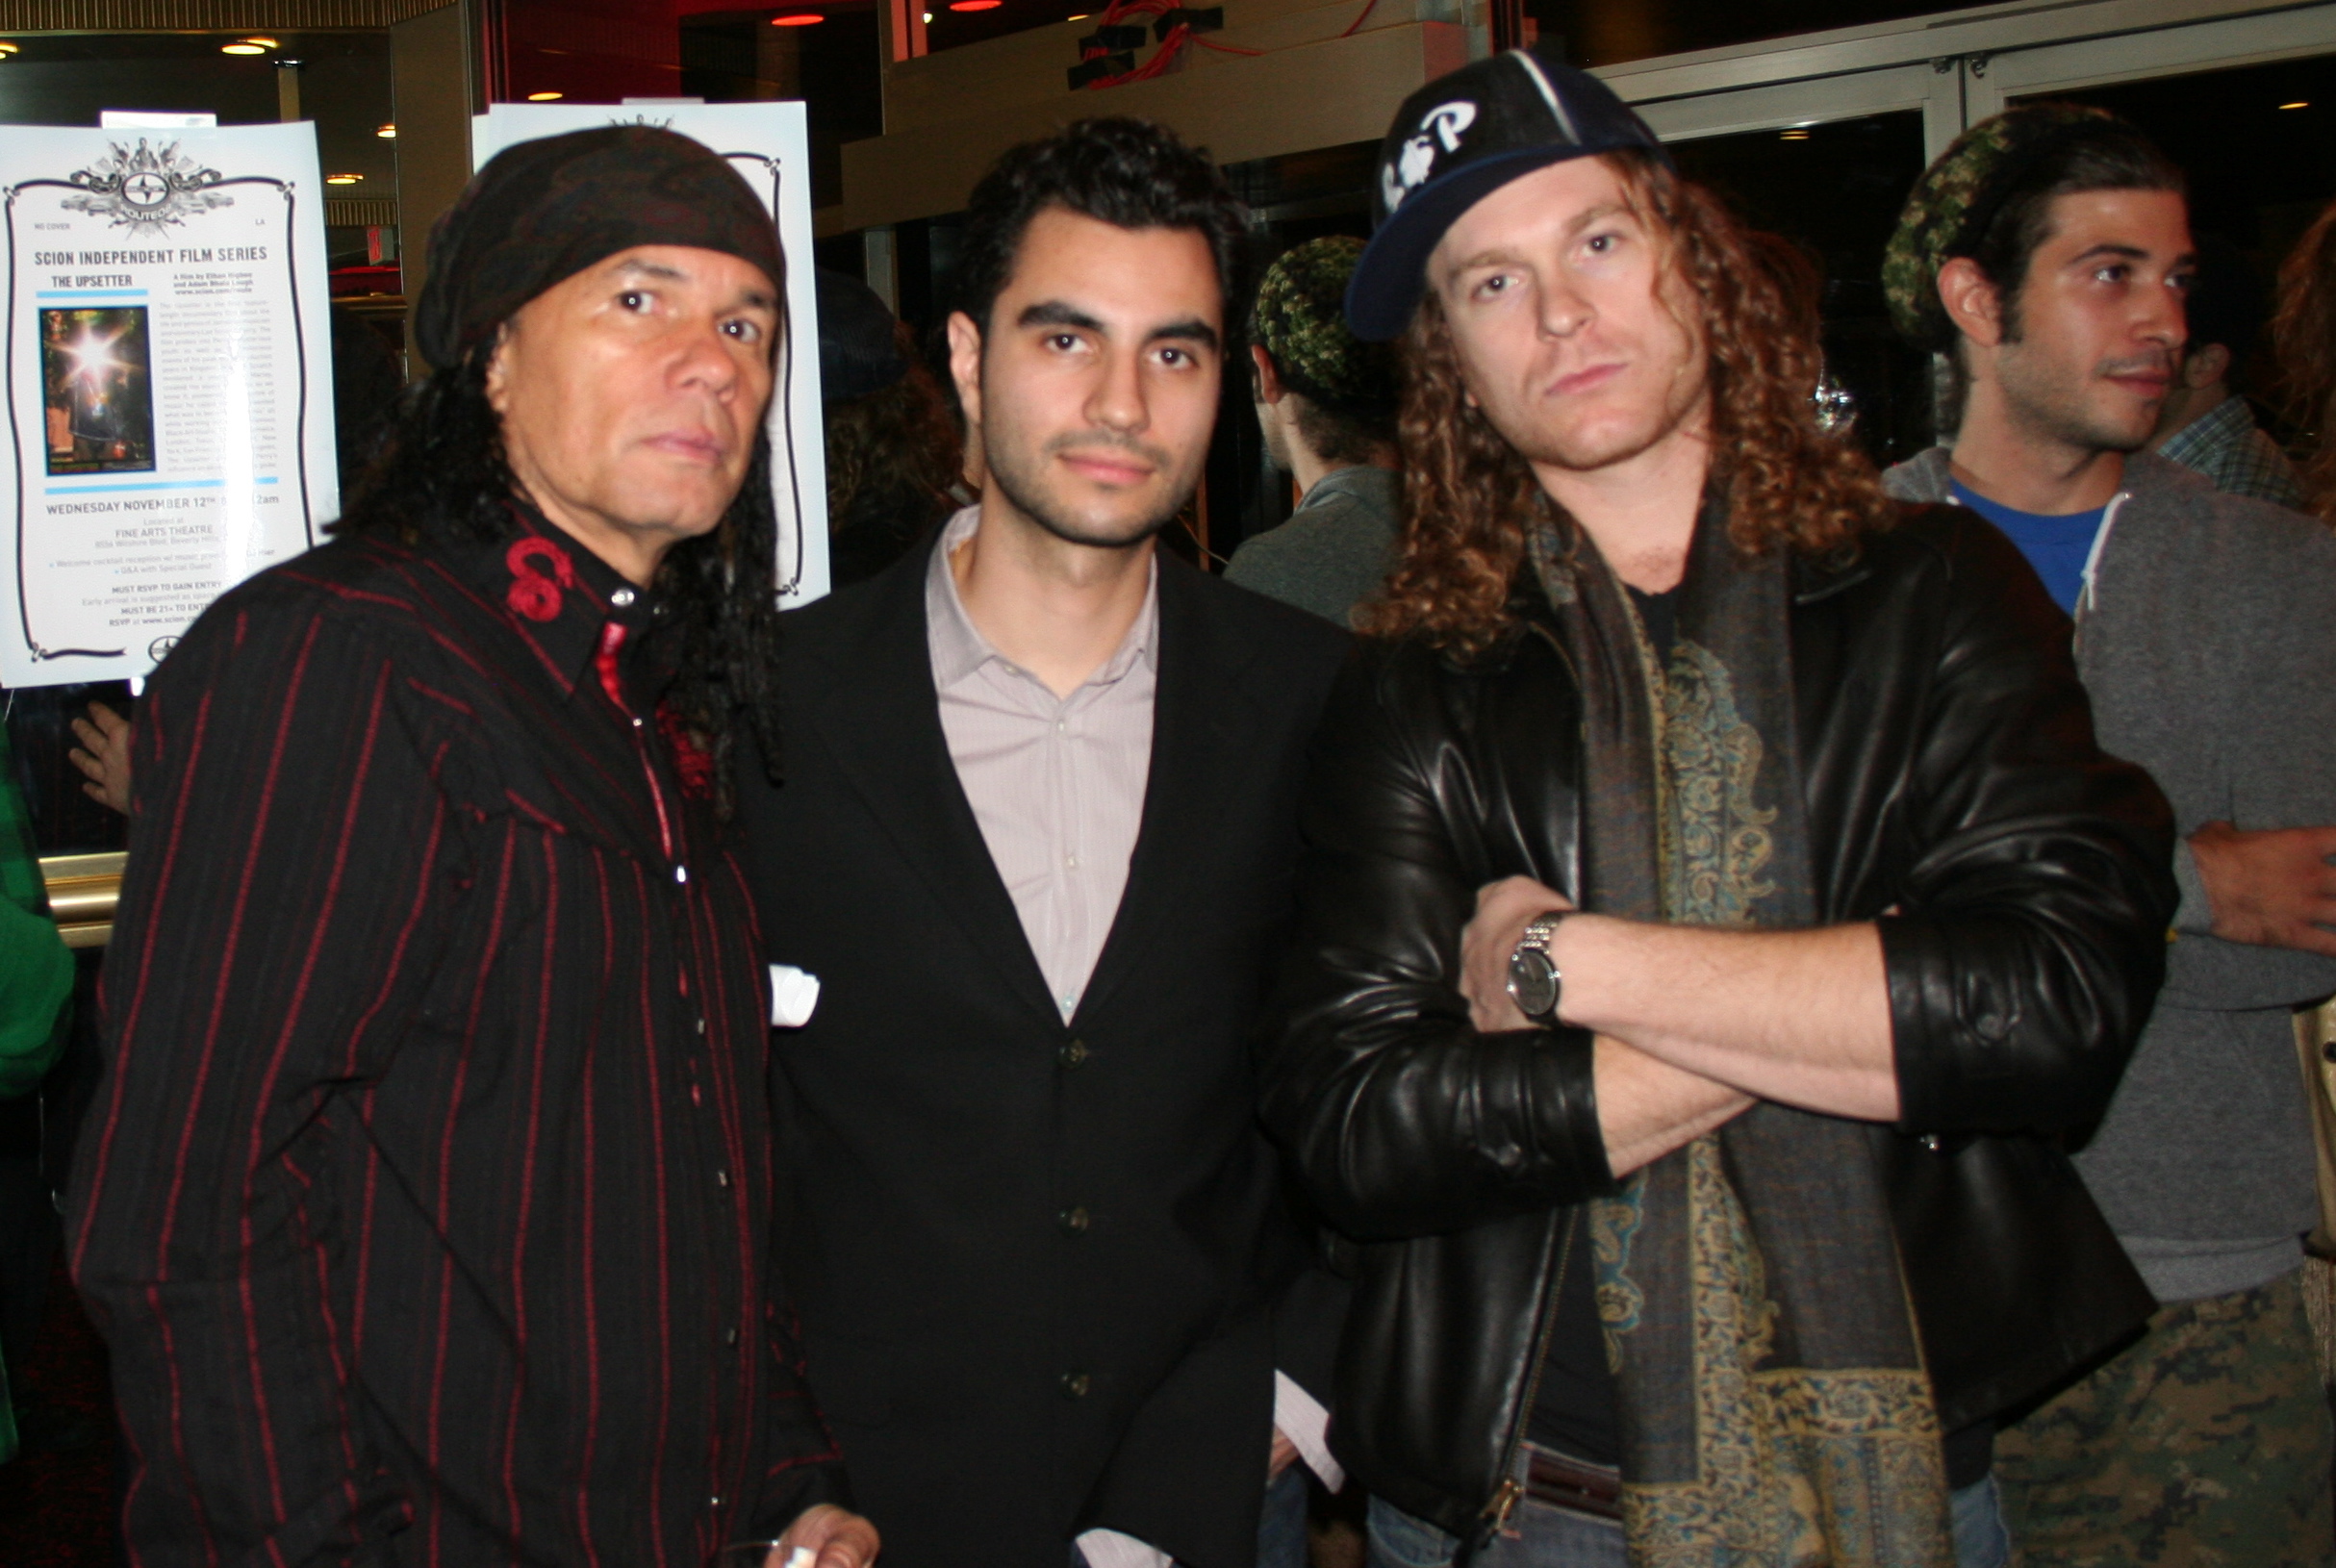 Wayne Jobson, Adam Bhala Lough, Ethan Higbee, attend screening of The Upsetter on the Scion Route Tour